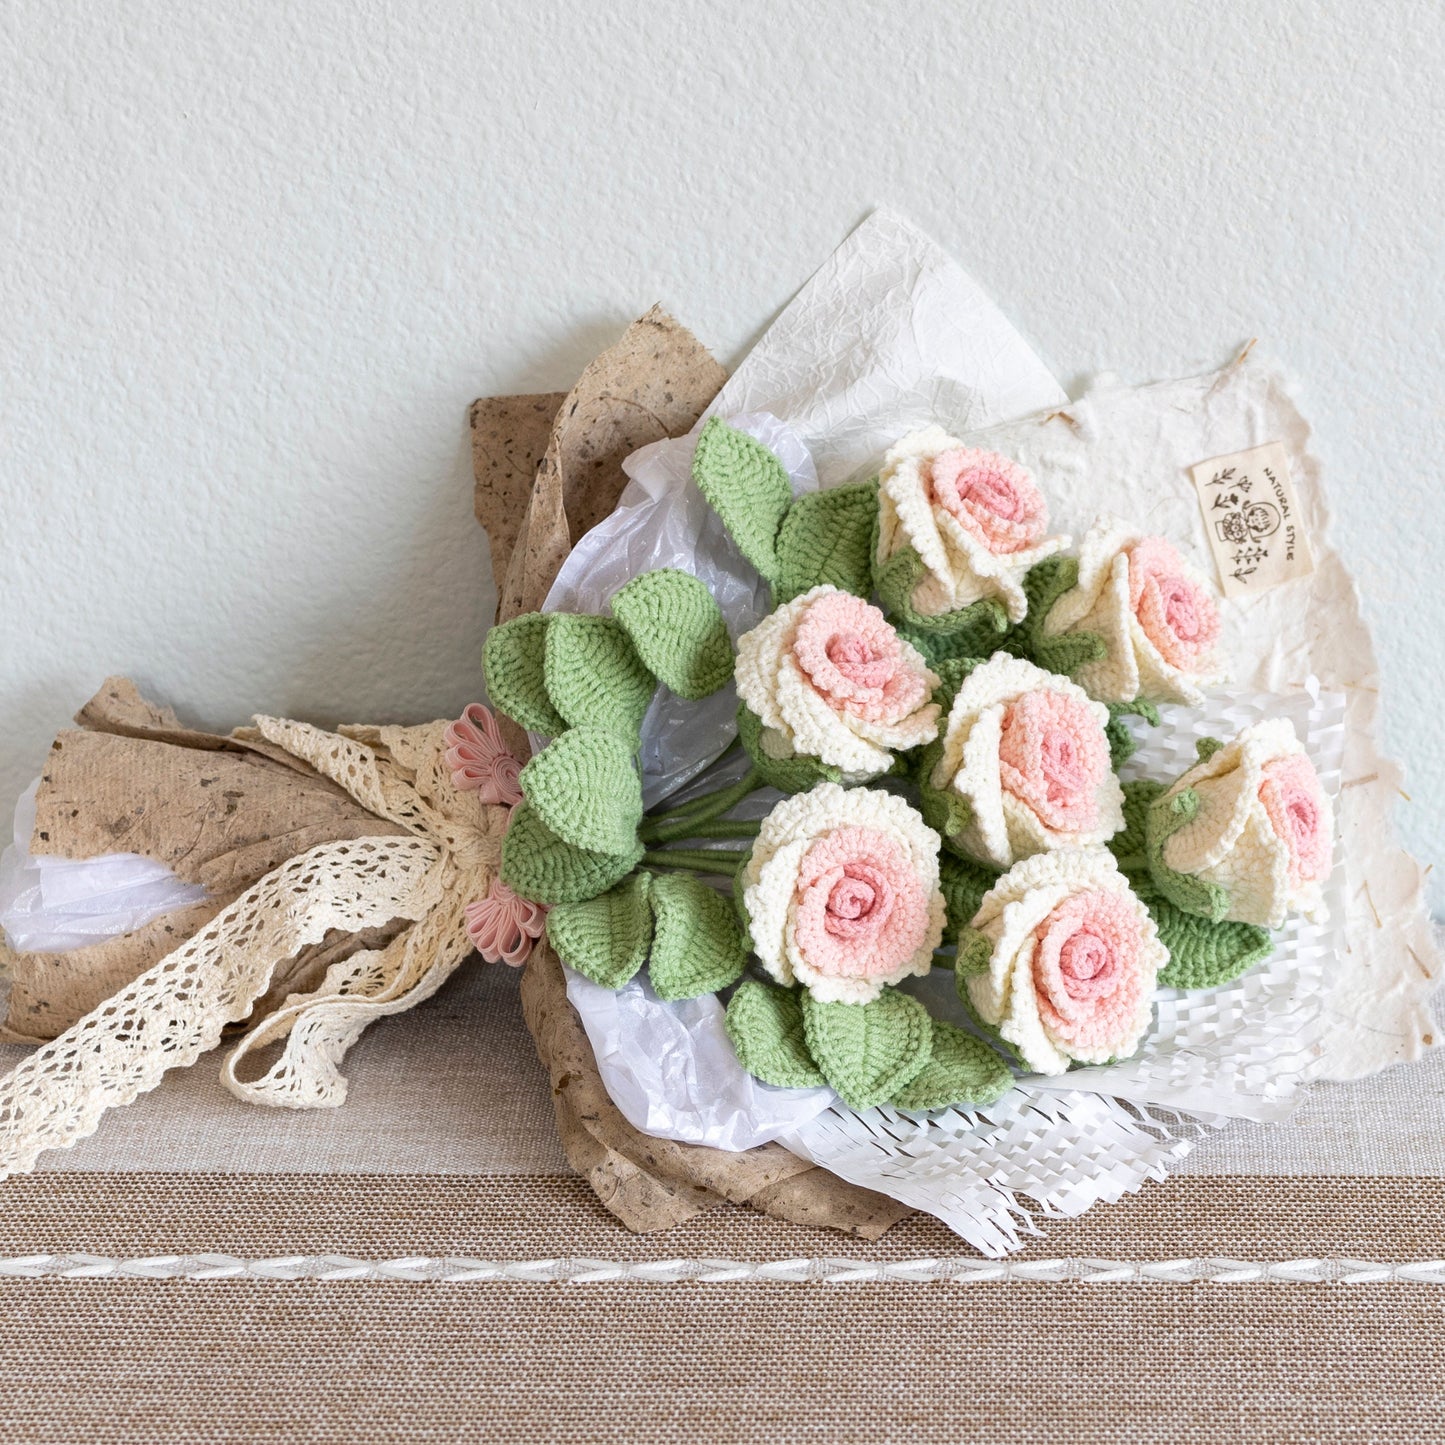 Bridal Bouquet Elegant Crochet Roses Bouquet Home Decor Gifts For Her